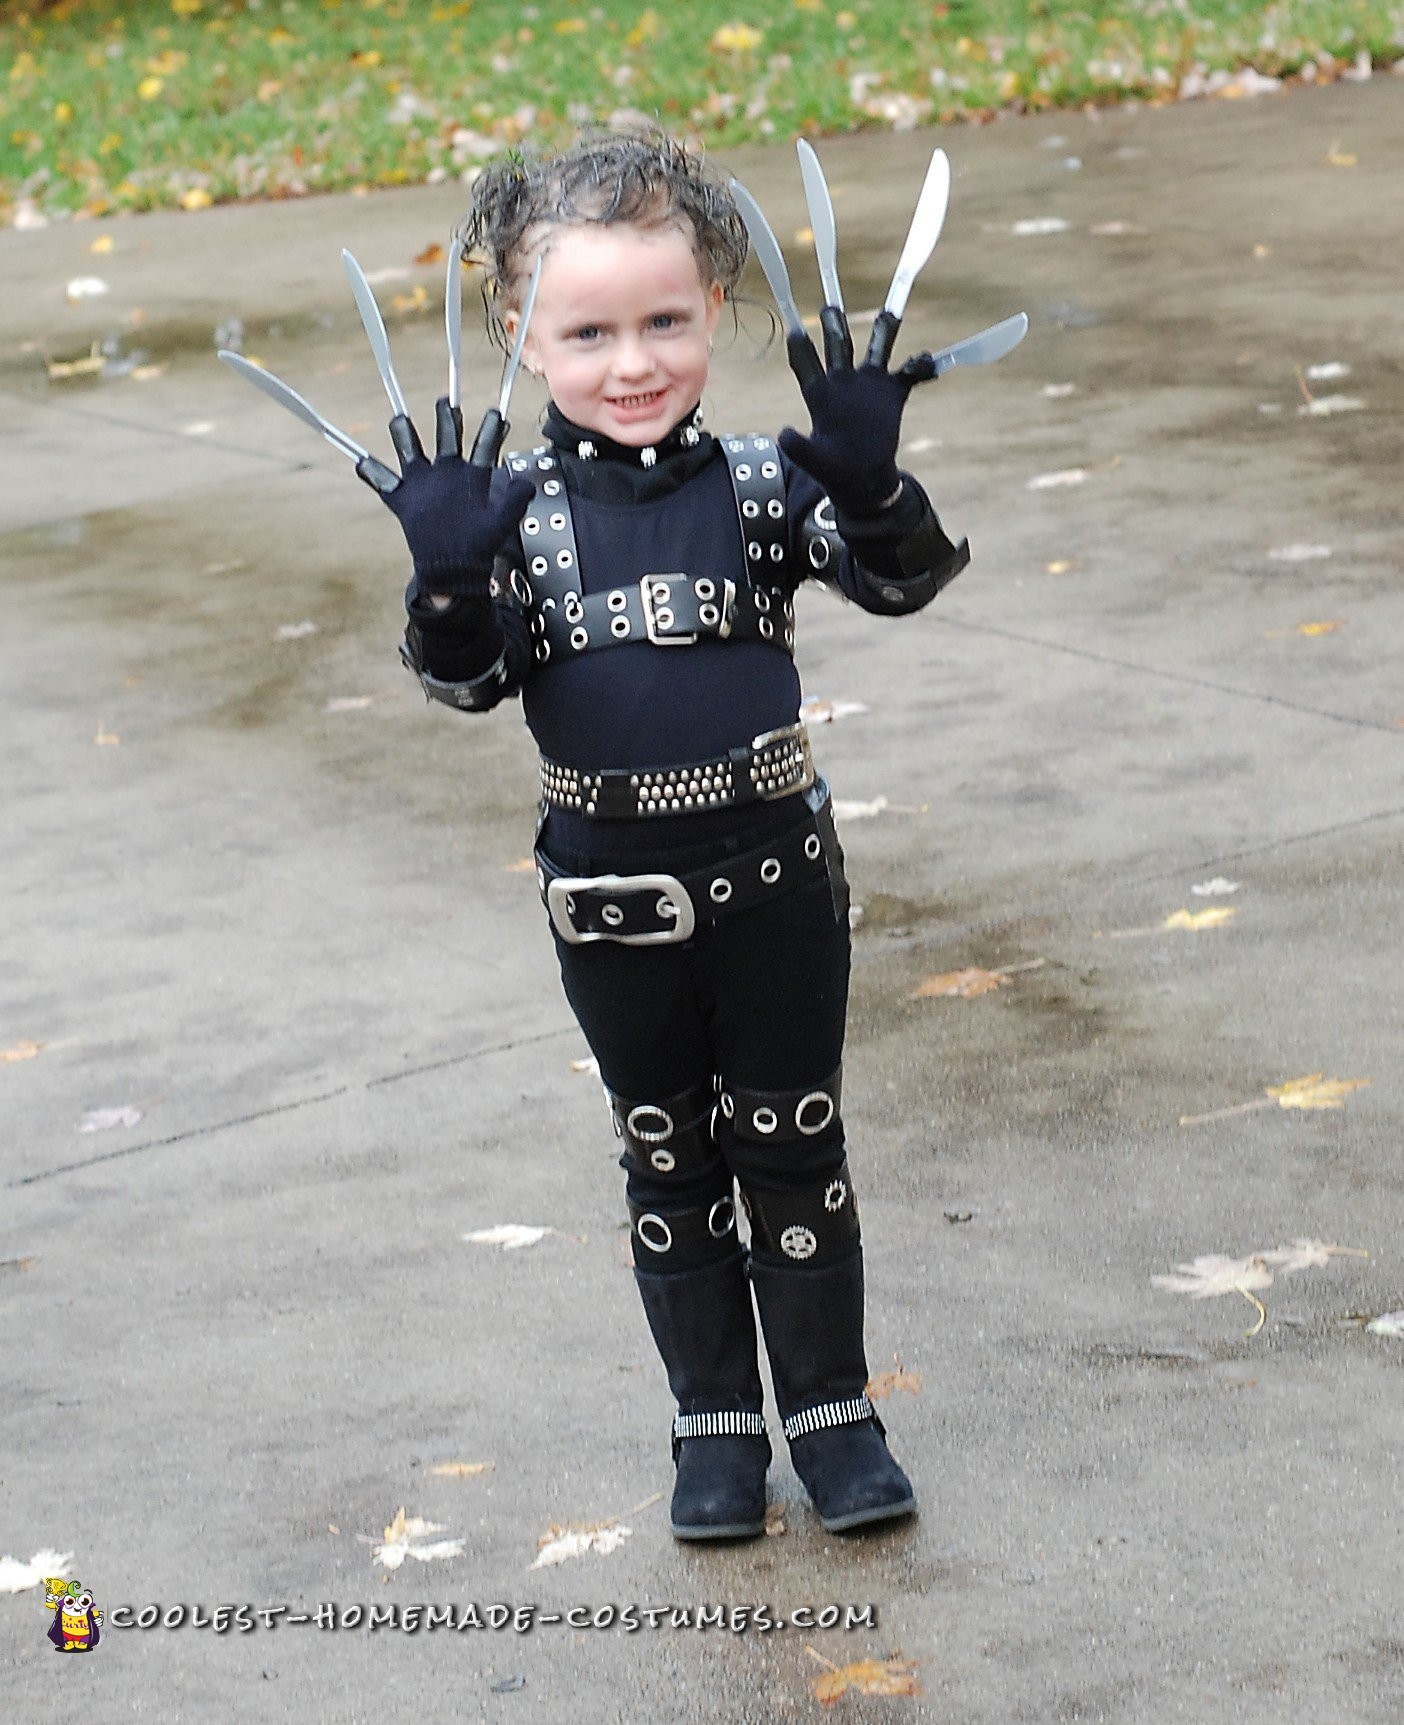 Awesome Edward Scissorhands Costume for a Girl